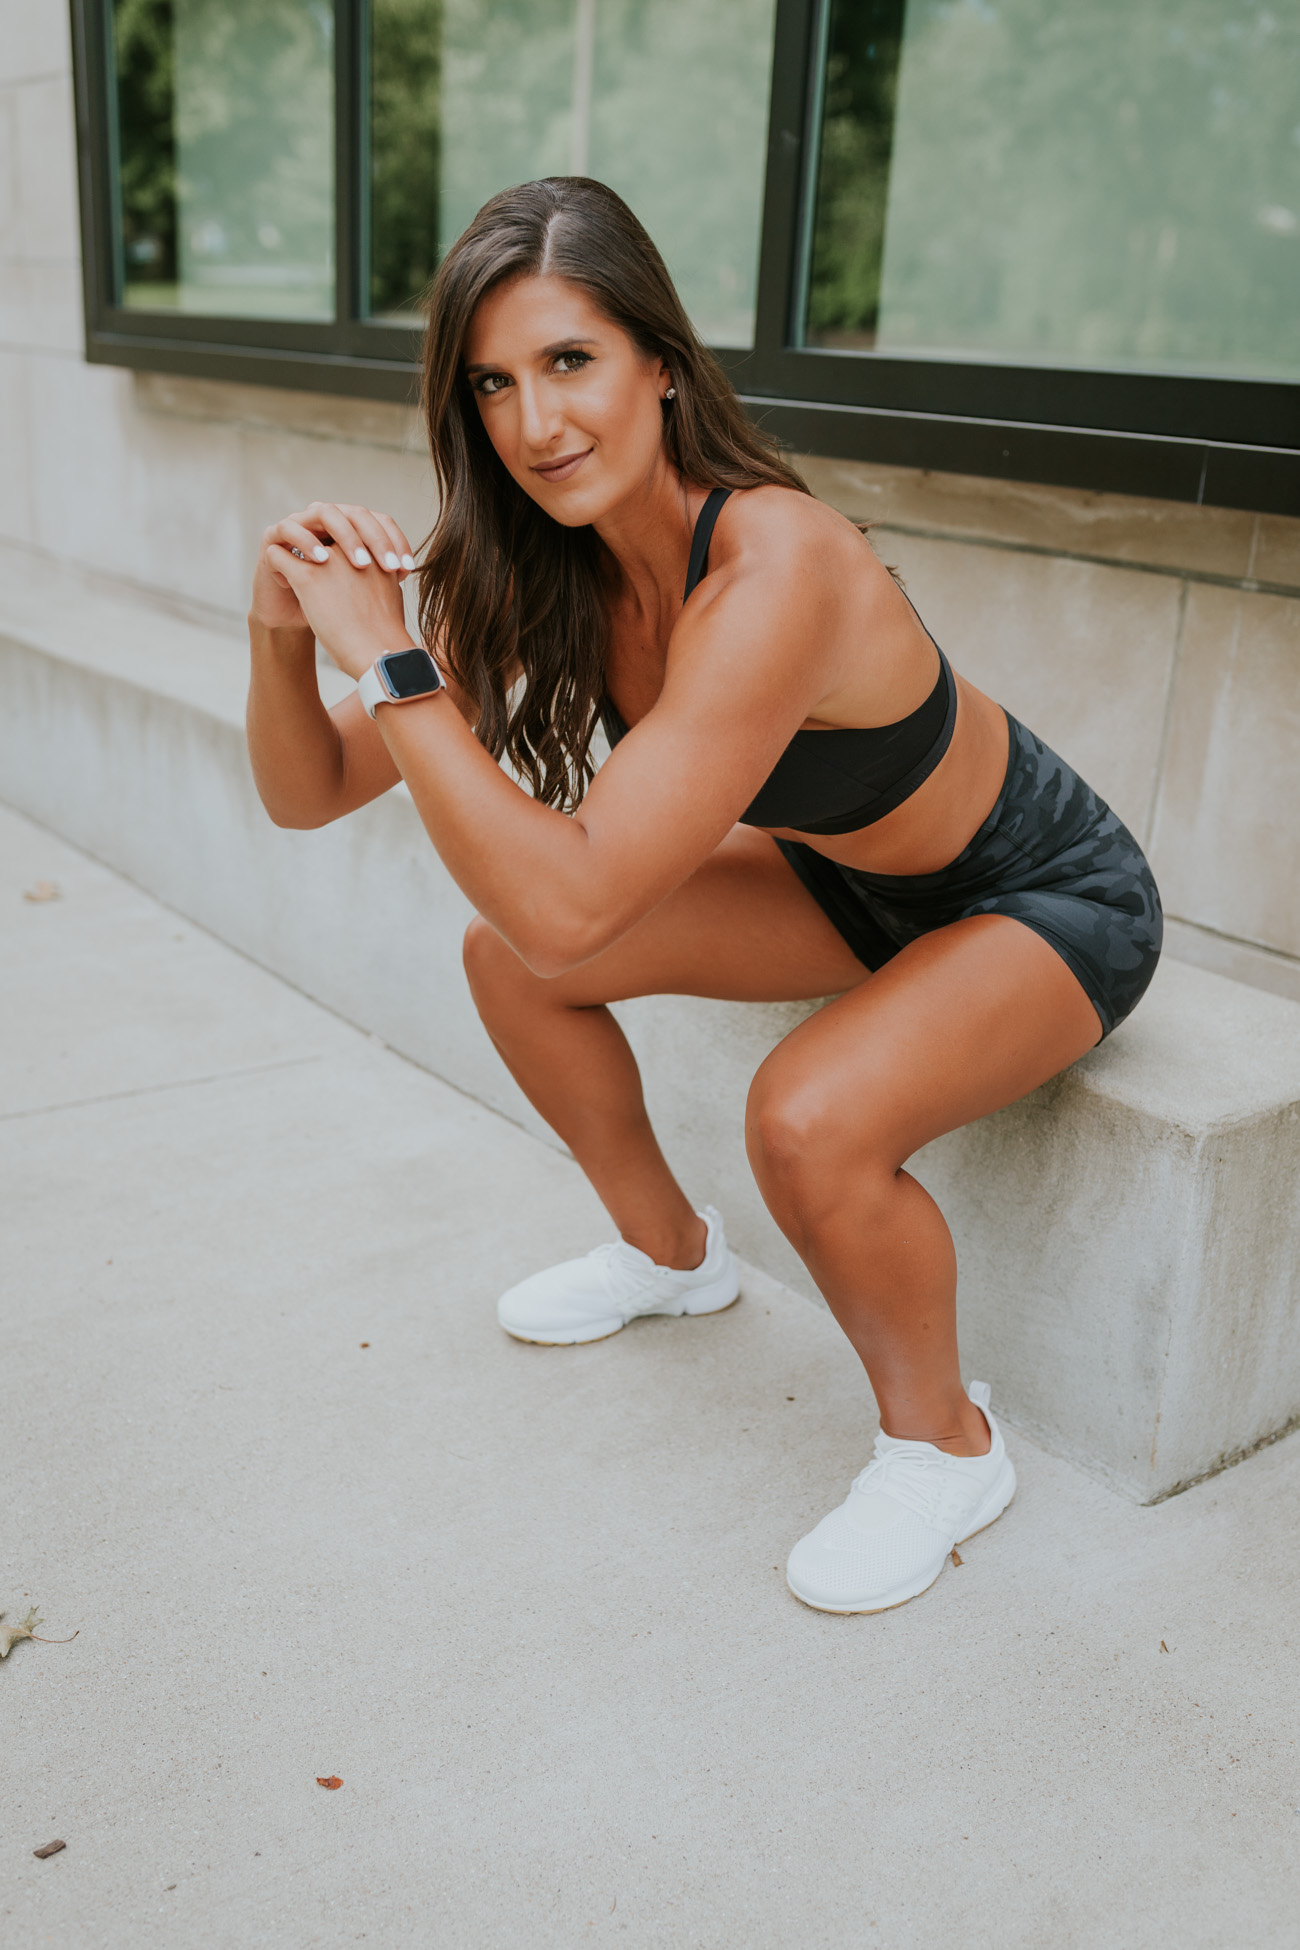 lululemon align shorts, up for it bra, lululemon activewear, muscle tank, athleisure, cute workout outfit, fitwithasd // grace white a southern drawl